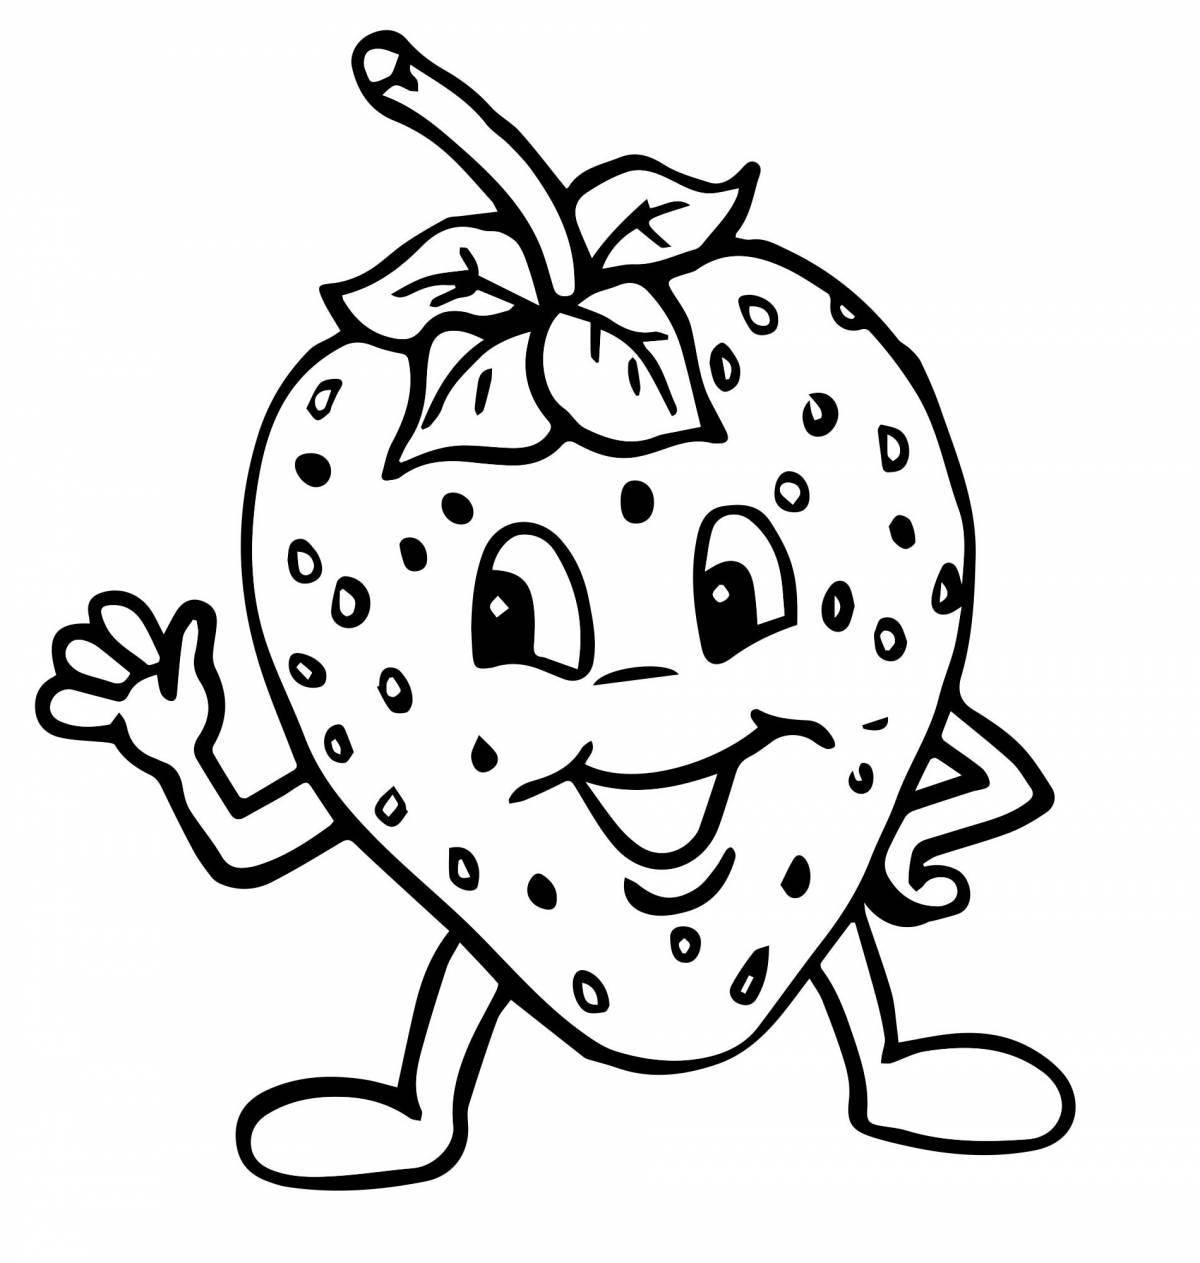 Coloring book strawberry drawing